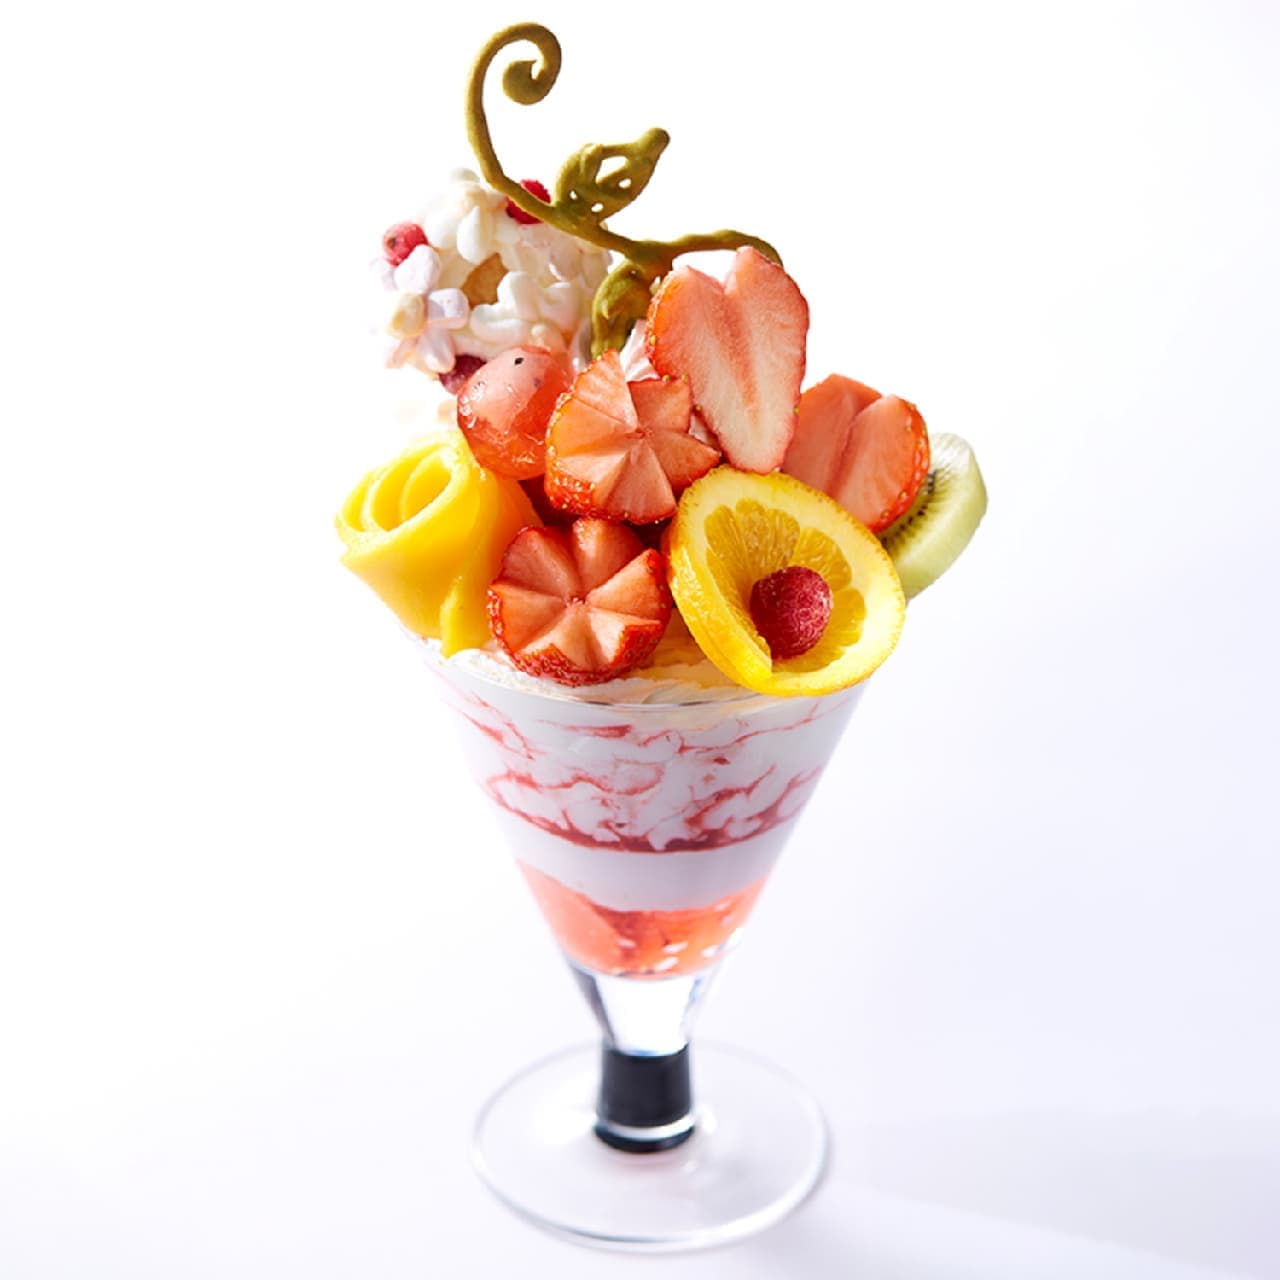 Takano Fruit Parlor "Mother's Day Parfait